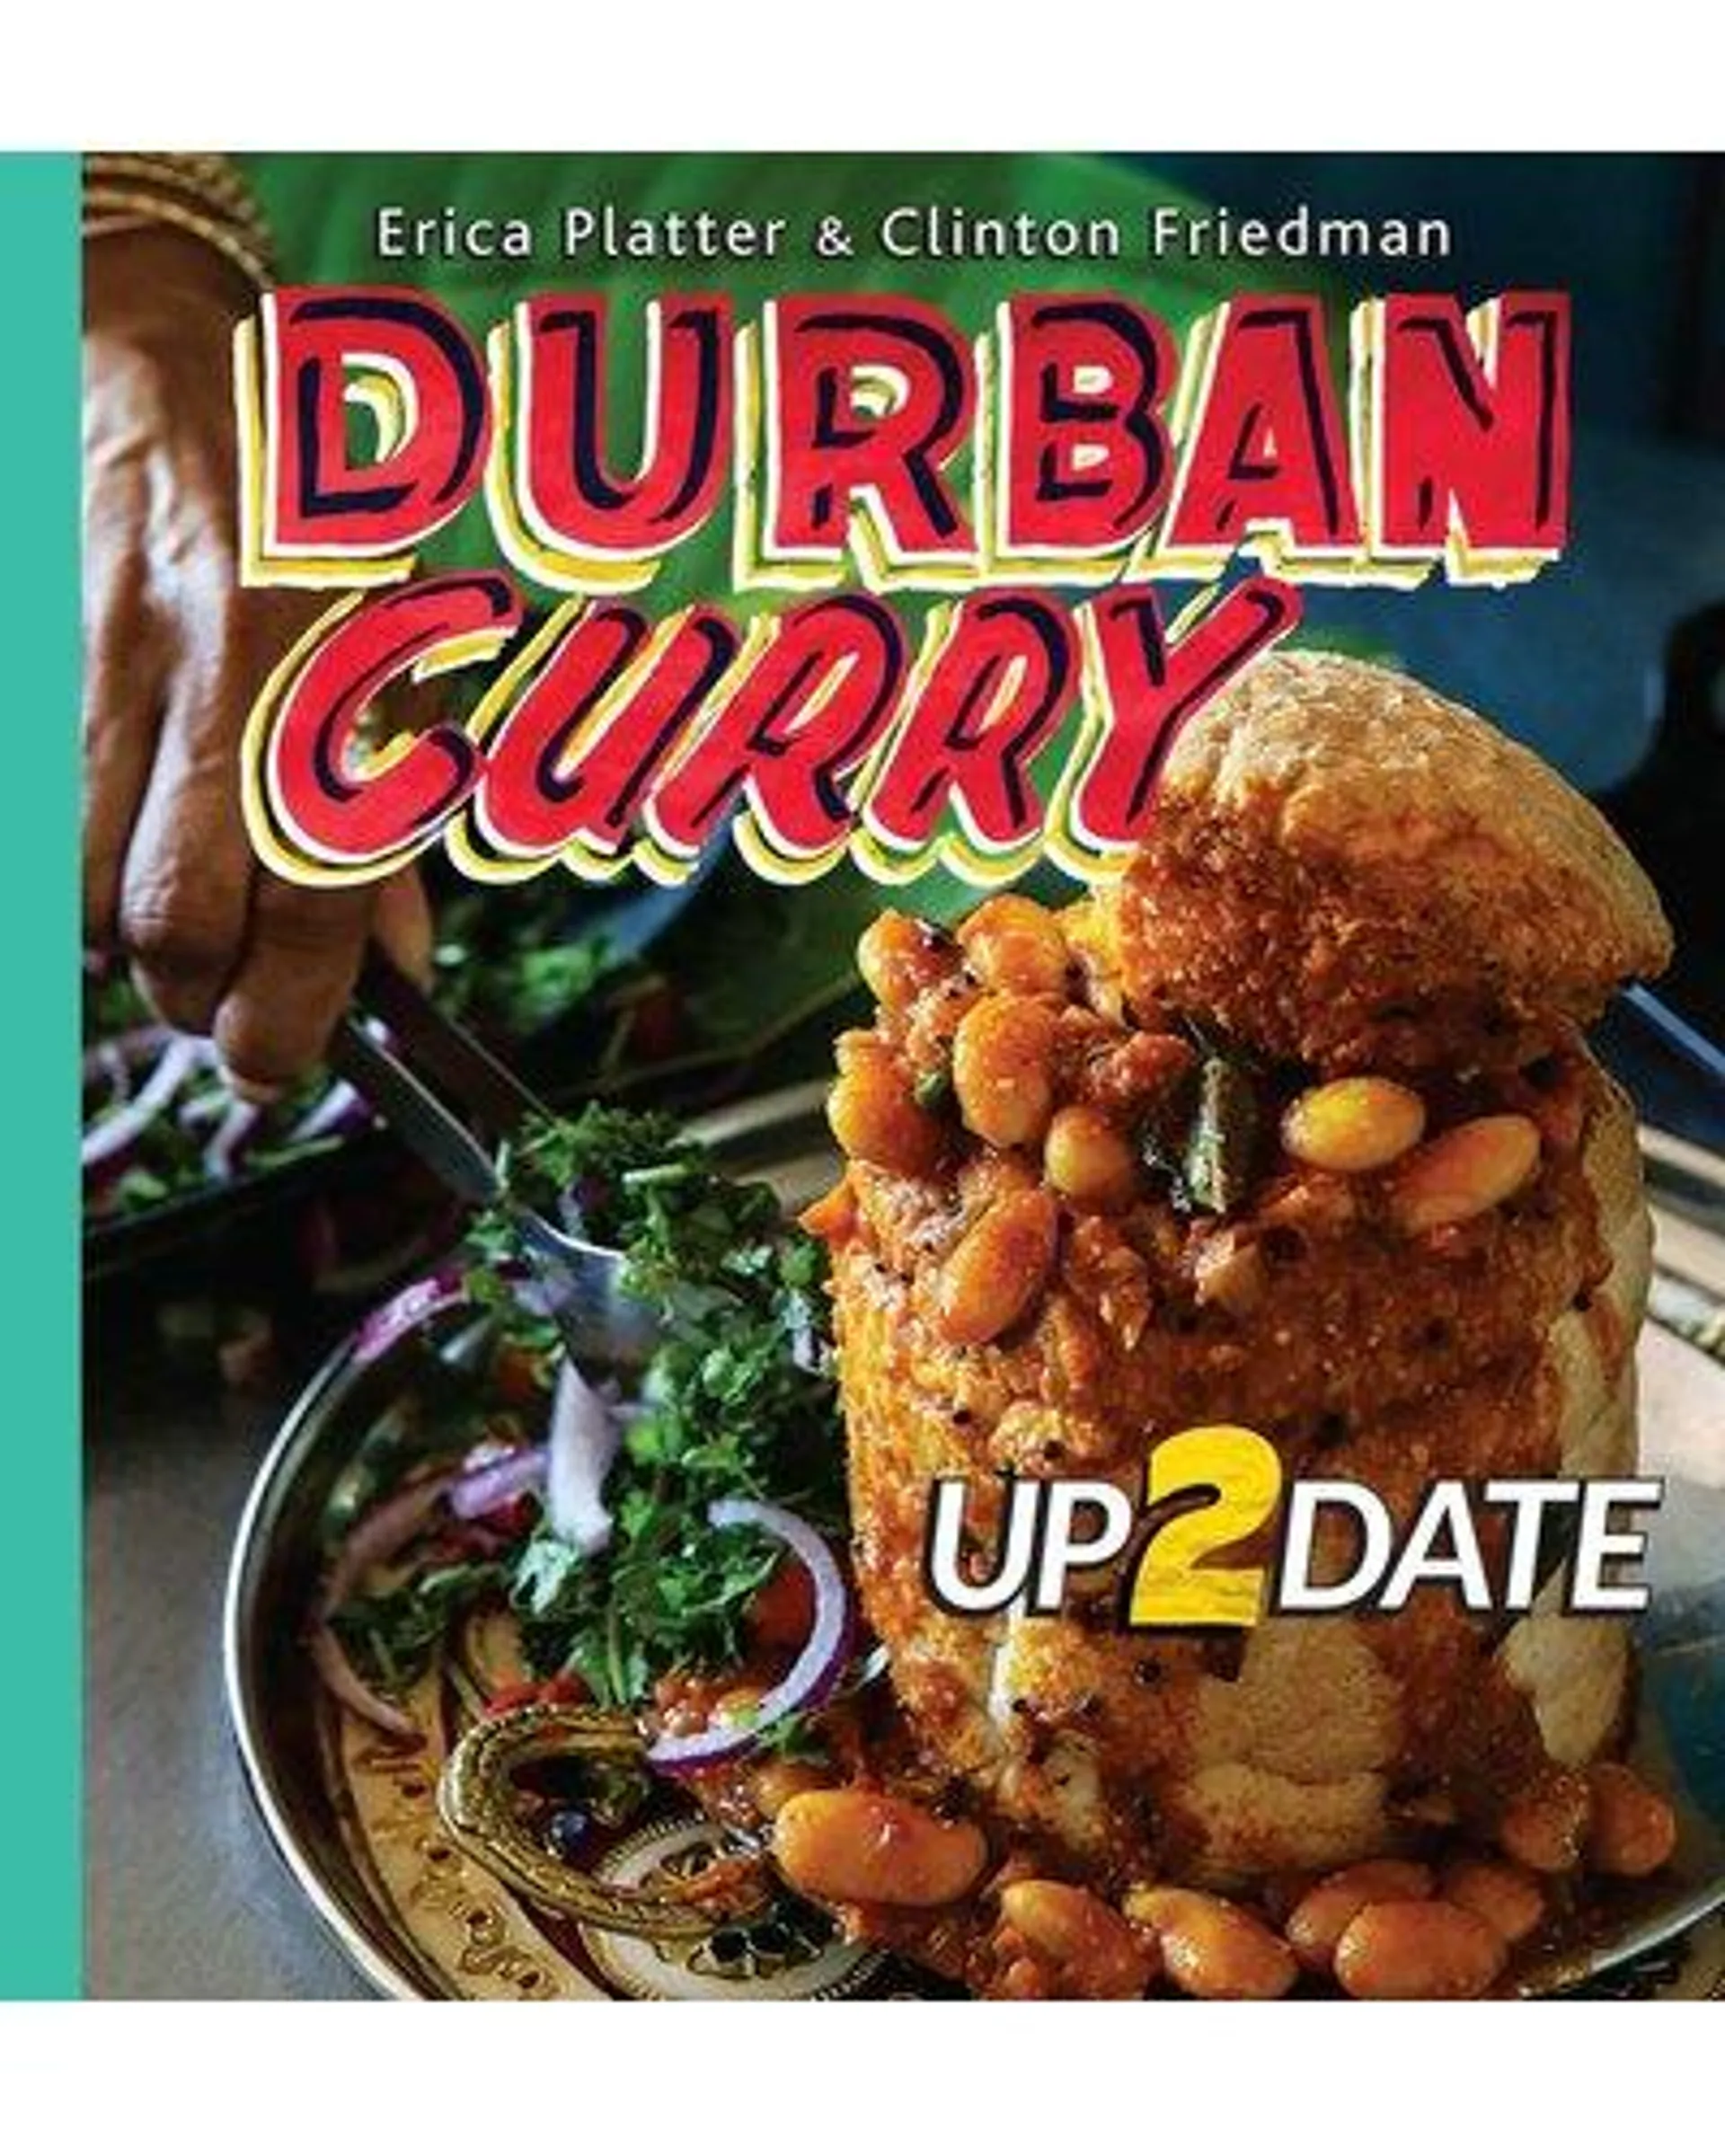 Durban Curry - Up 2 Date (Paperback)